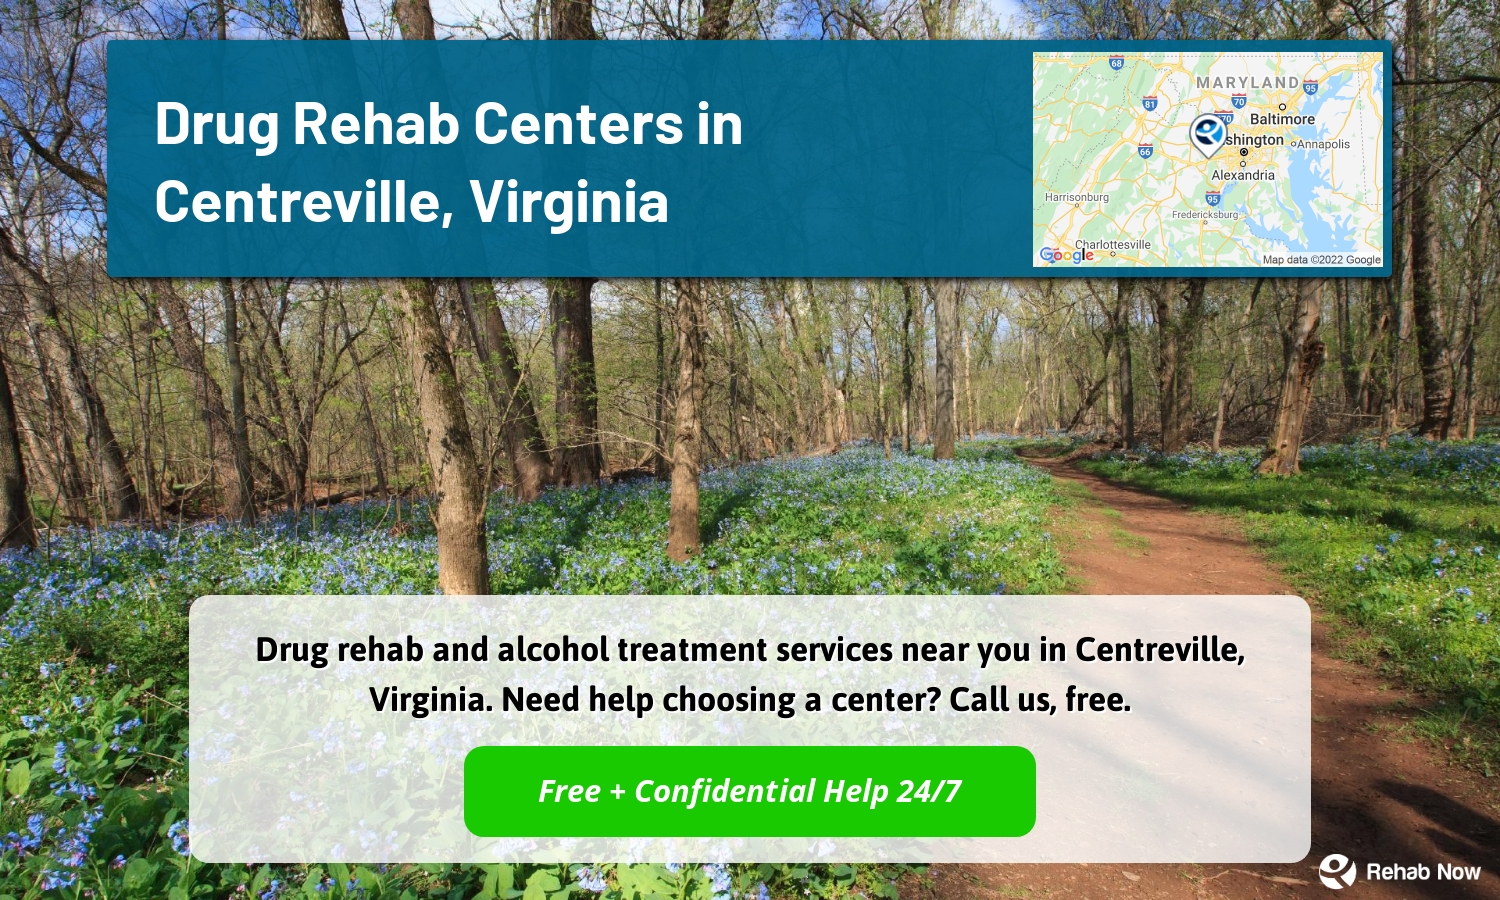 Drug rehab and alcohol treatment services near you in Centreville, Virginia. Need help choosing a center? Call us, free.